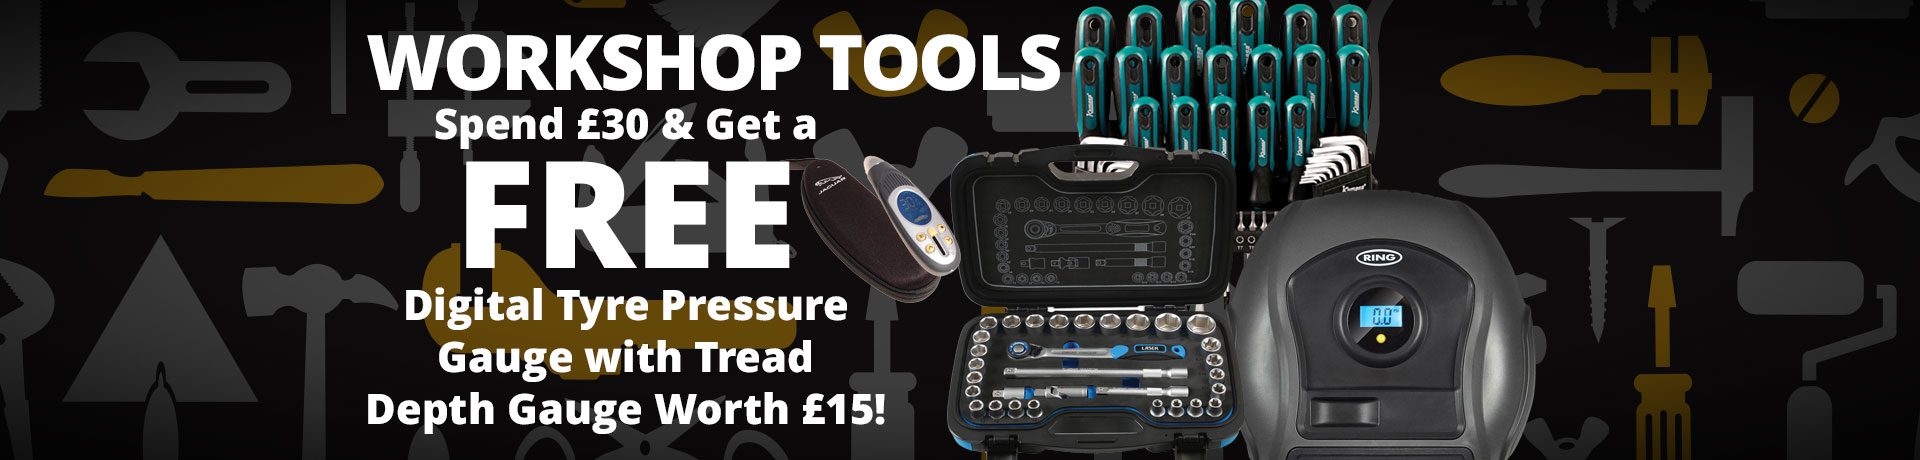 Free Digital Tire Pressure Gauge when you spend 30 or more on tools!